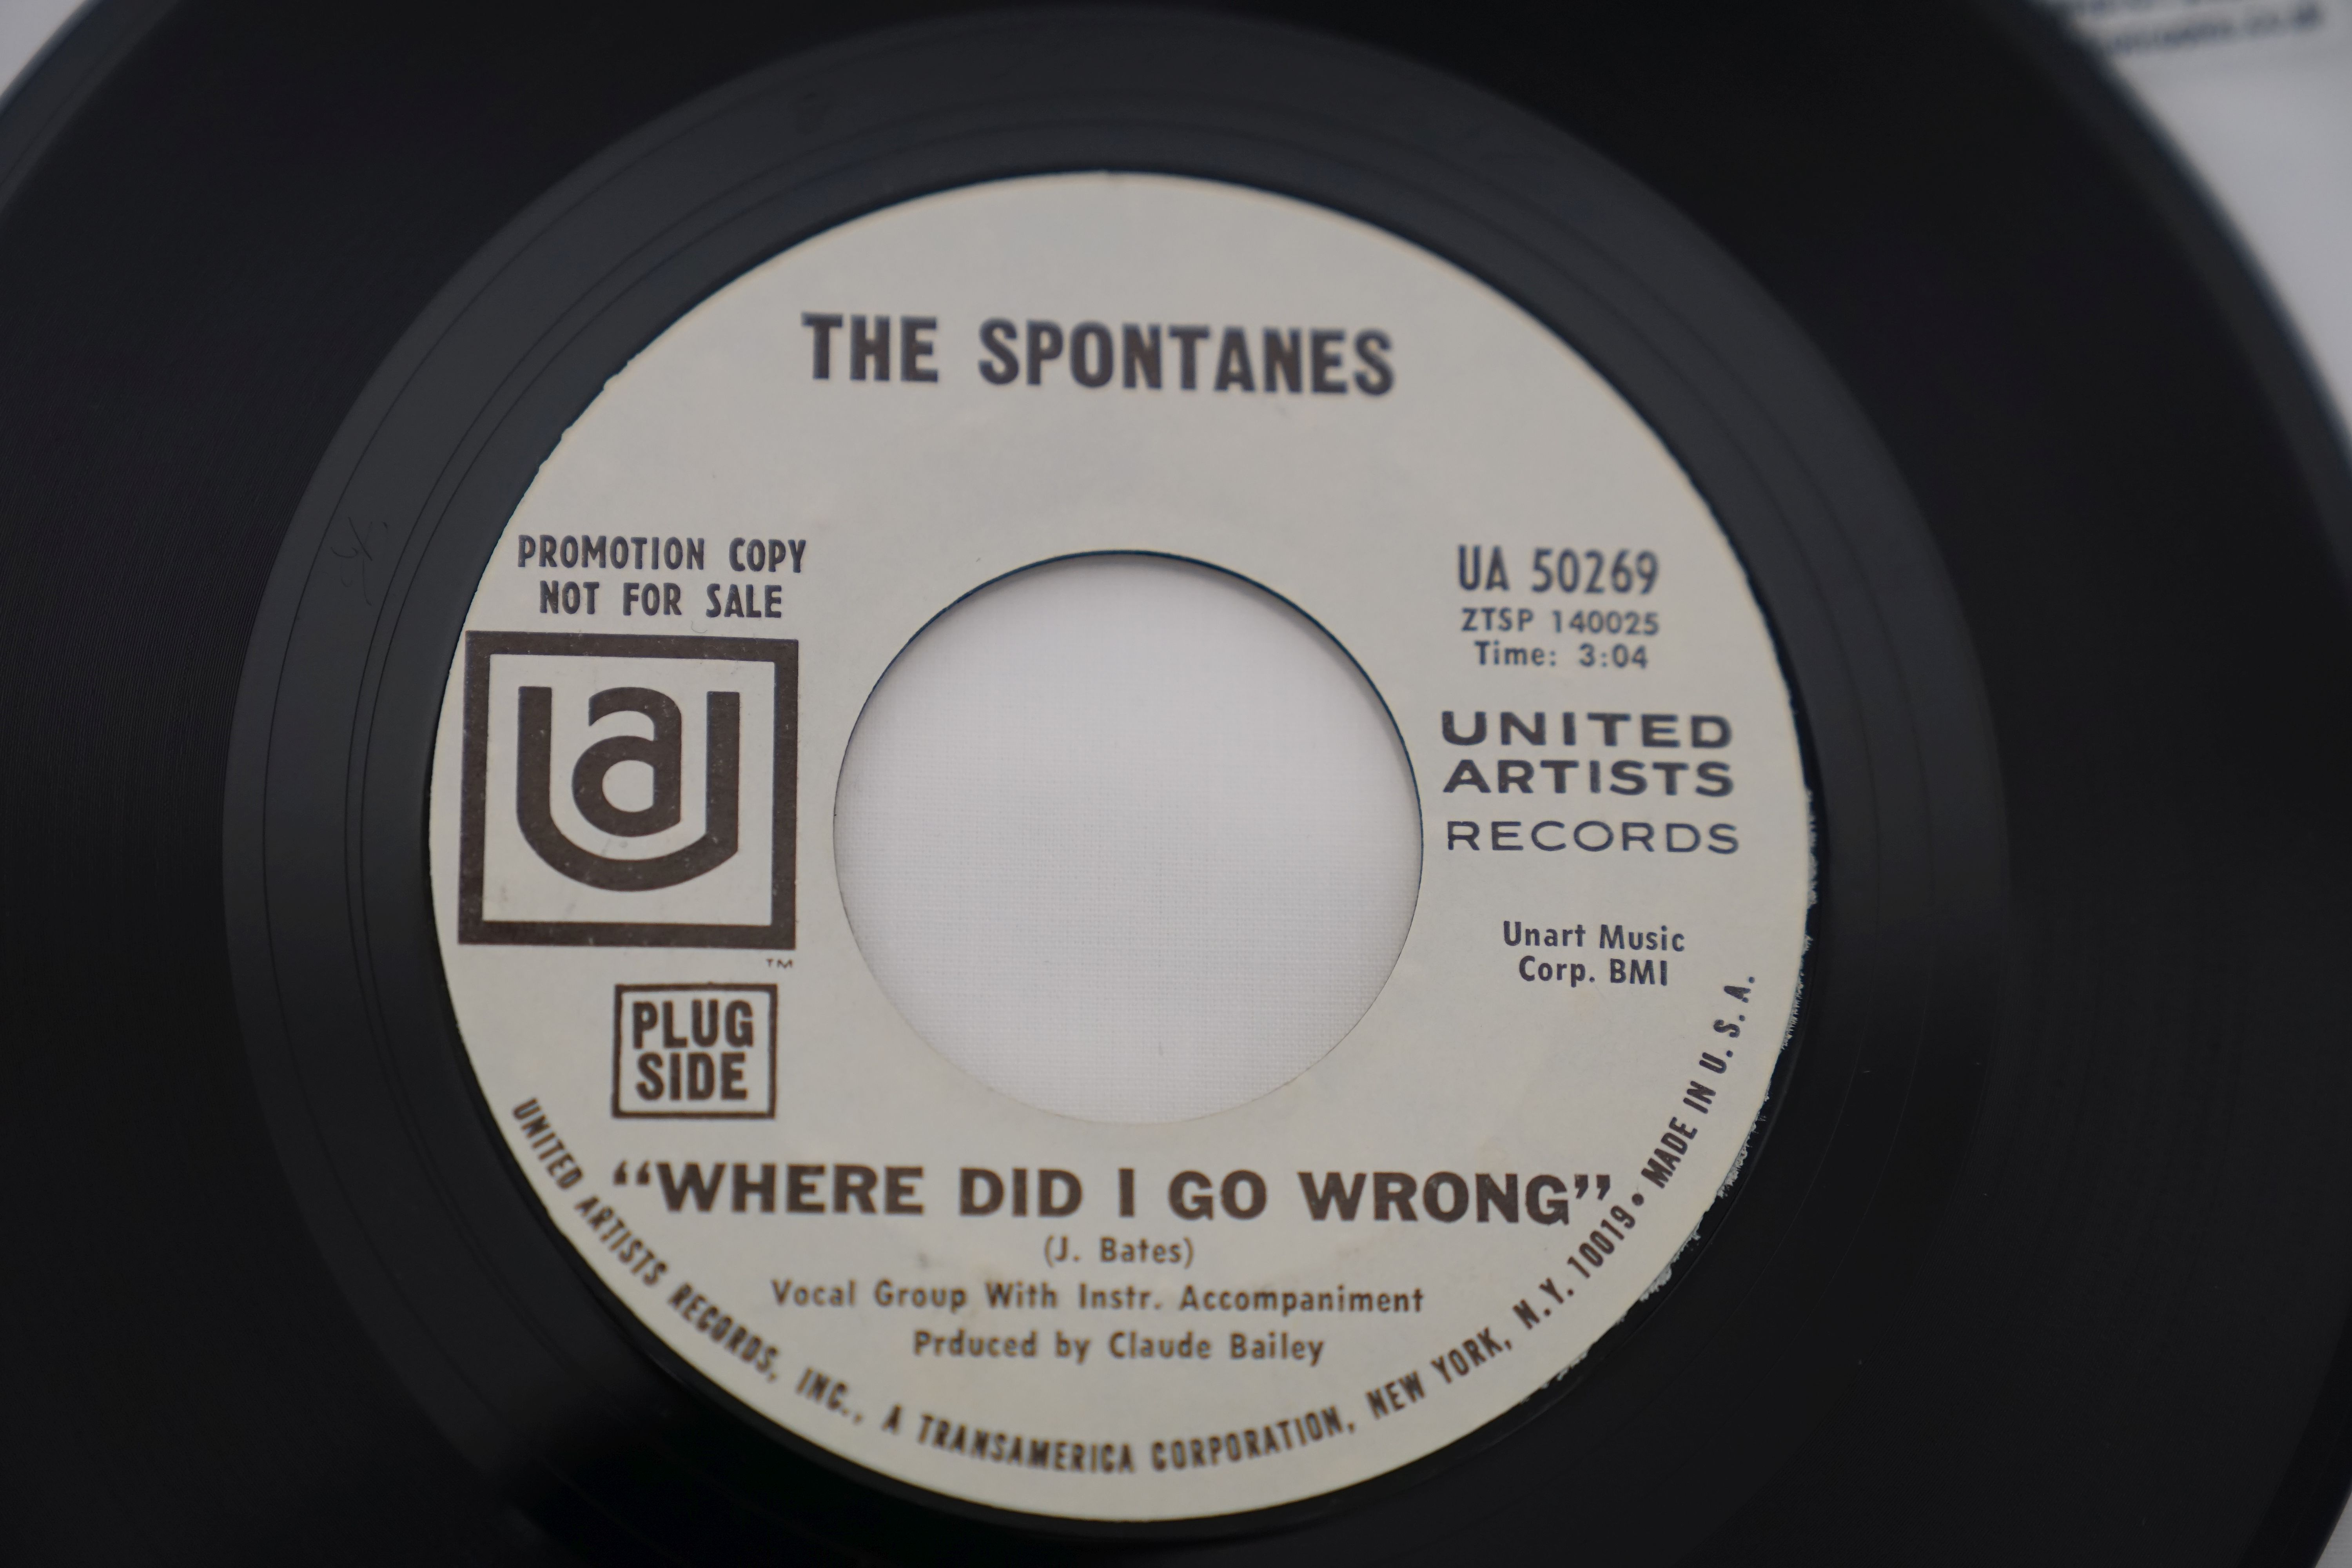 Vinyl - The Spontanes - Ain't No Bout Thing / Where Did I Go Wrong (United Artists Records UA - Image 5 of 5